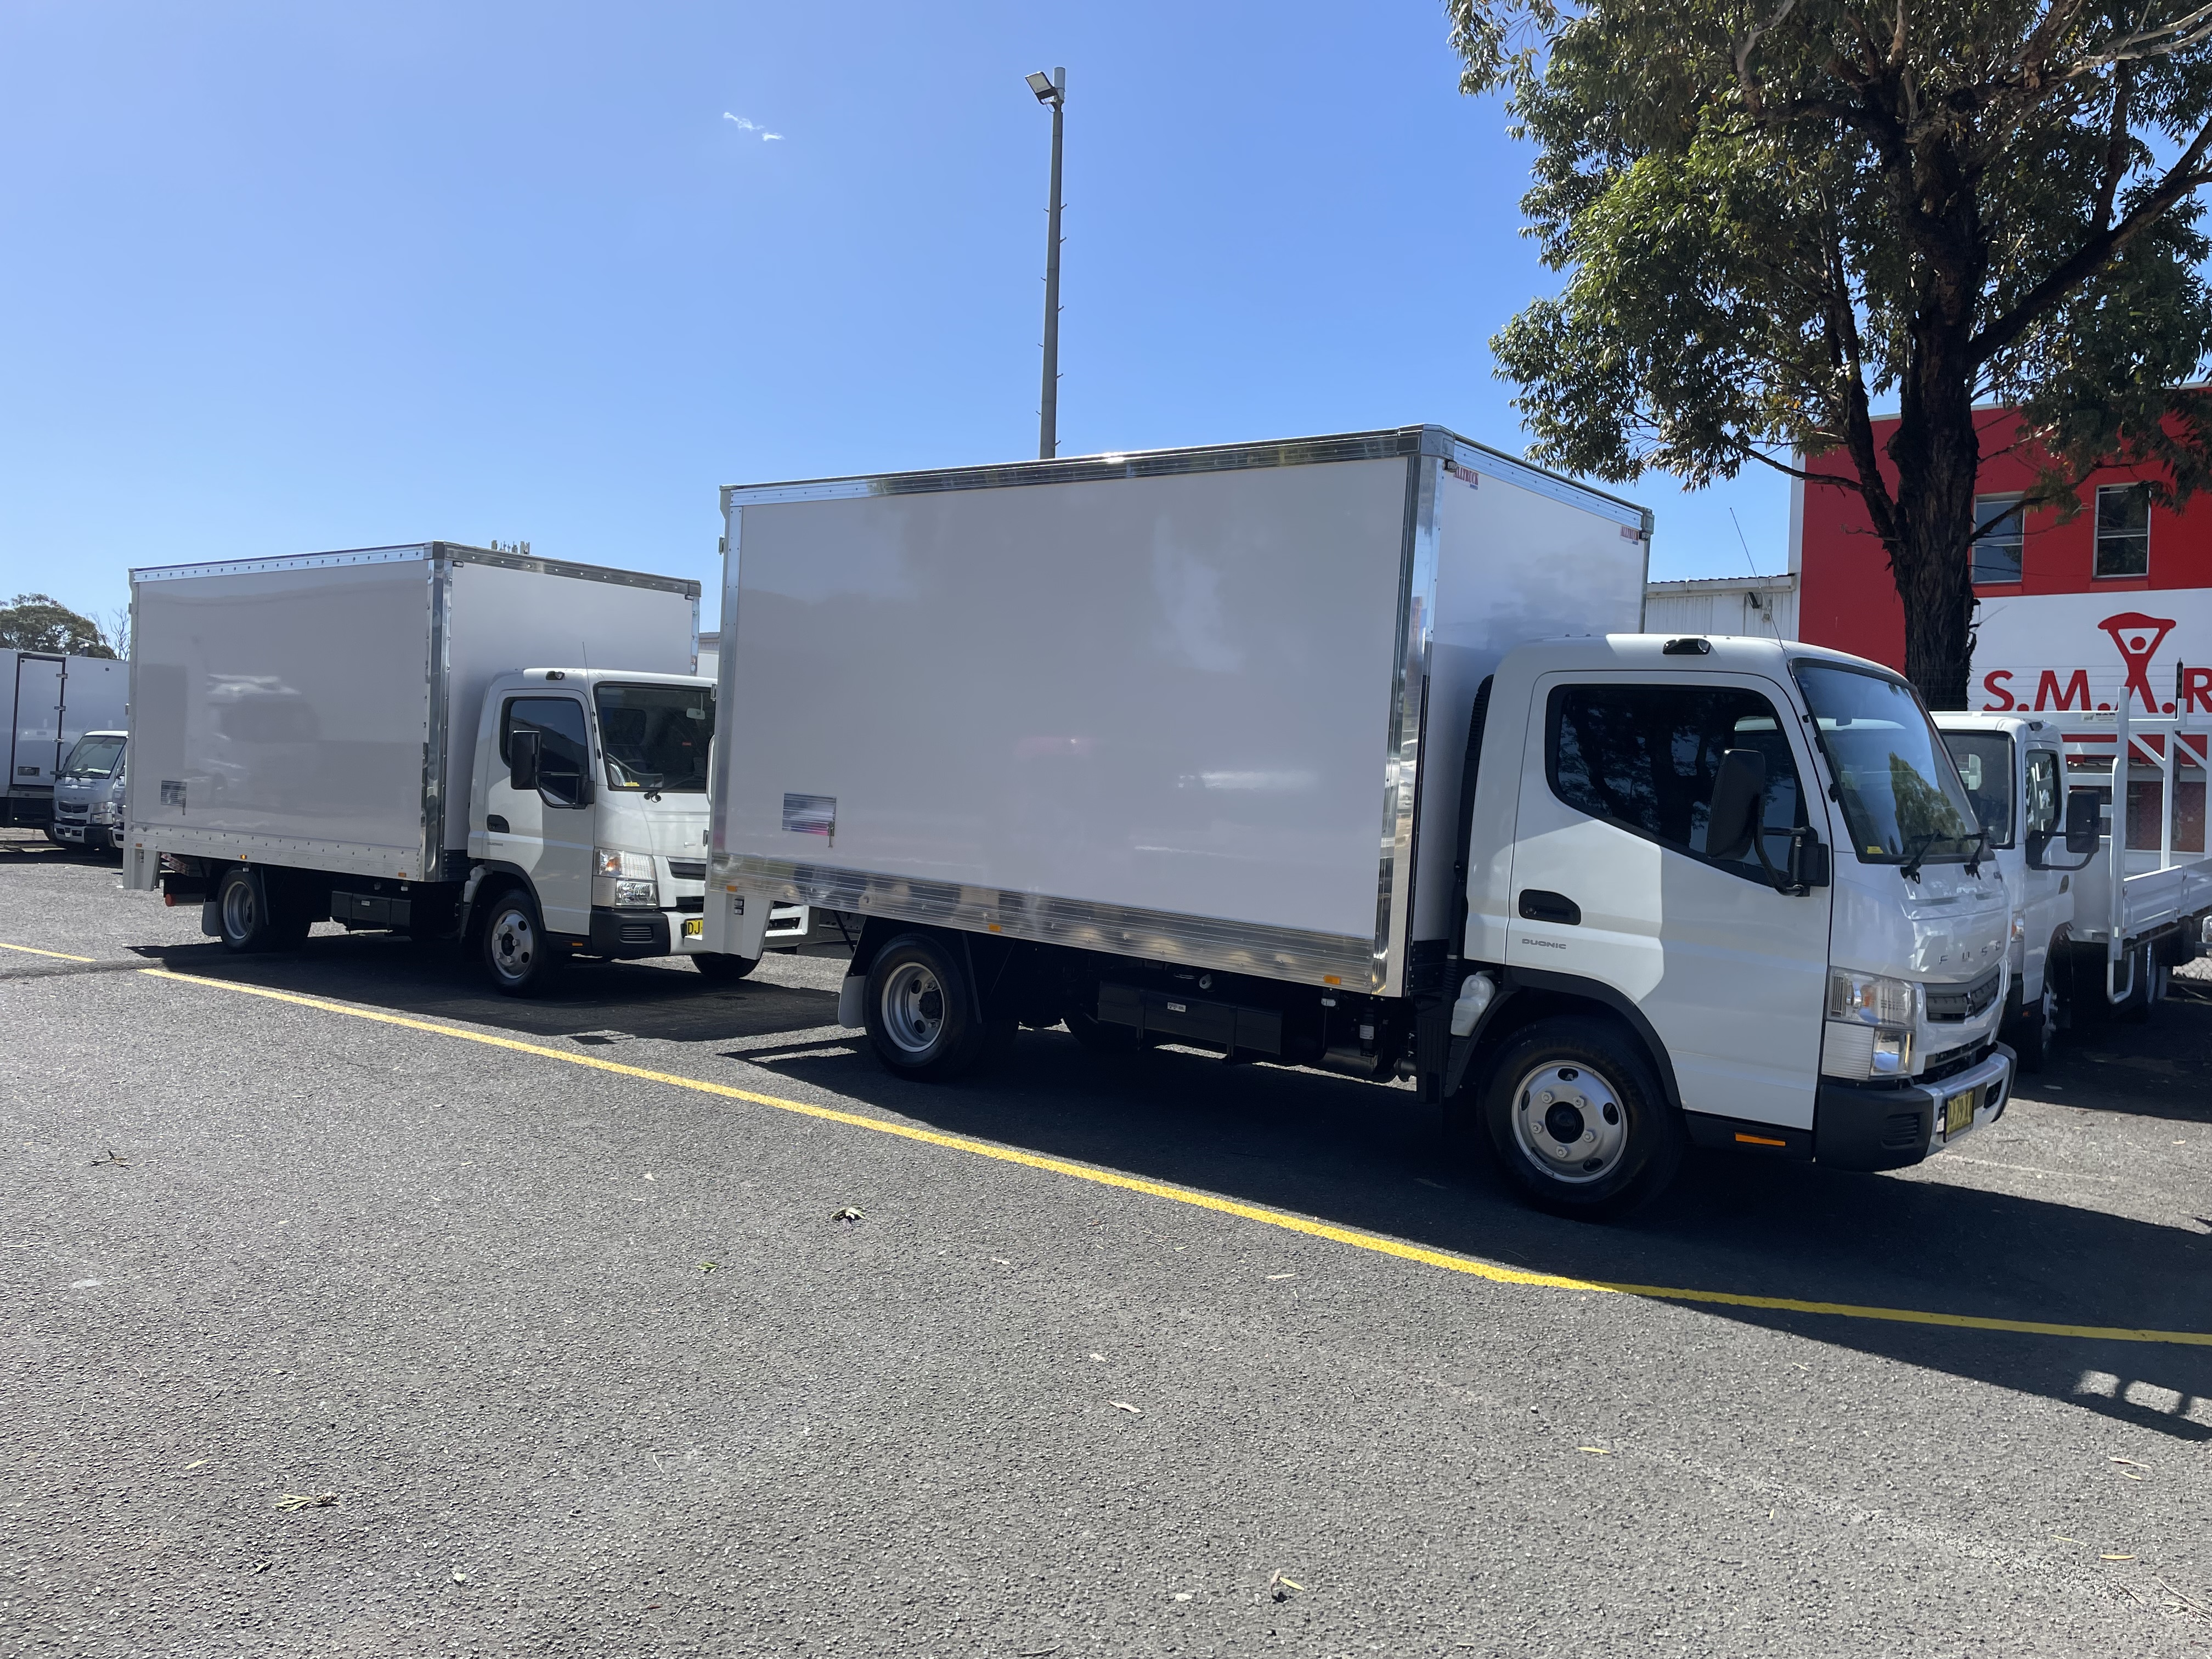 SKU LOGISTICS  has purchased several trucks over 4 years and has added another 2 trucks to their EXPANDING fleet!